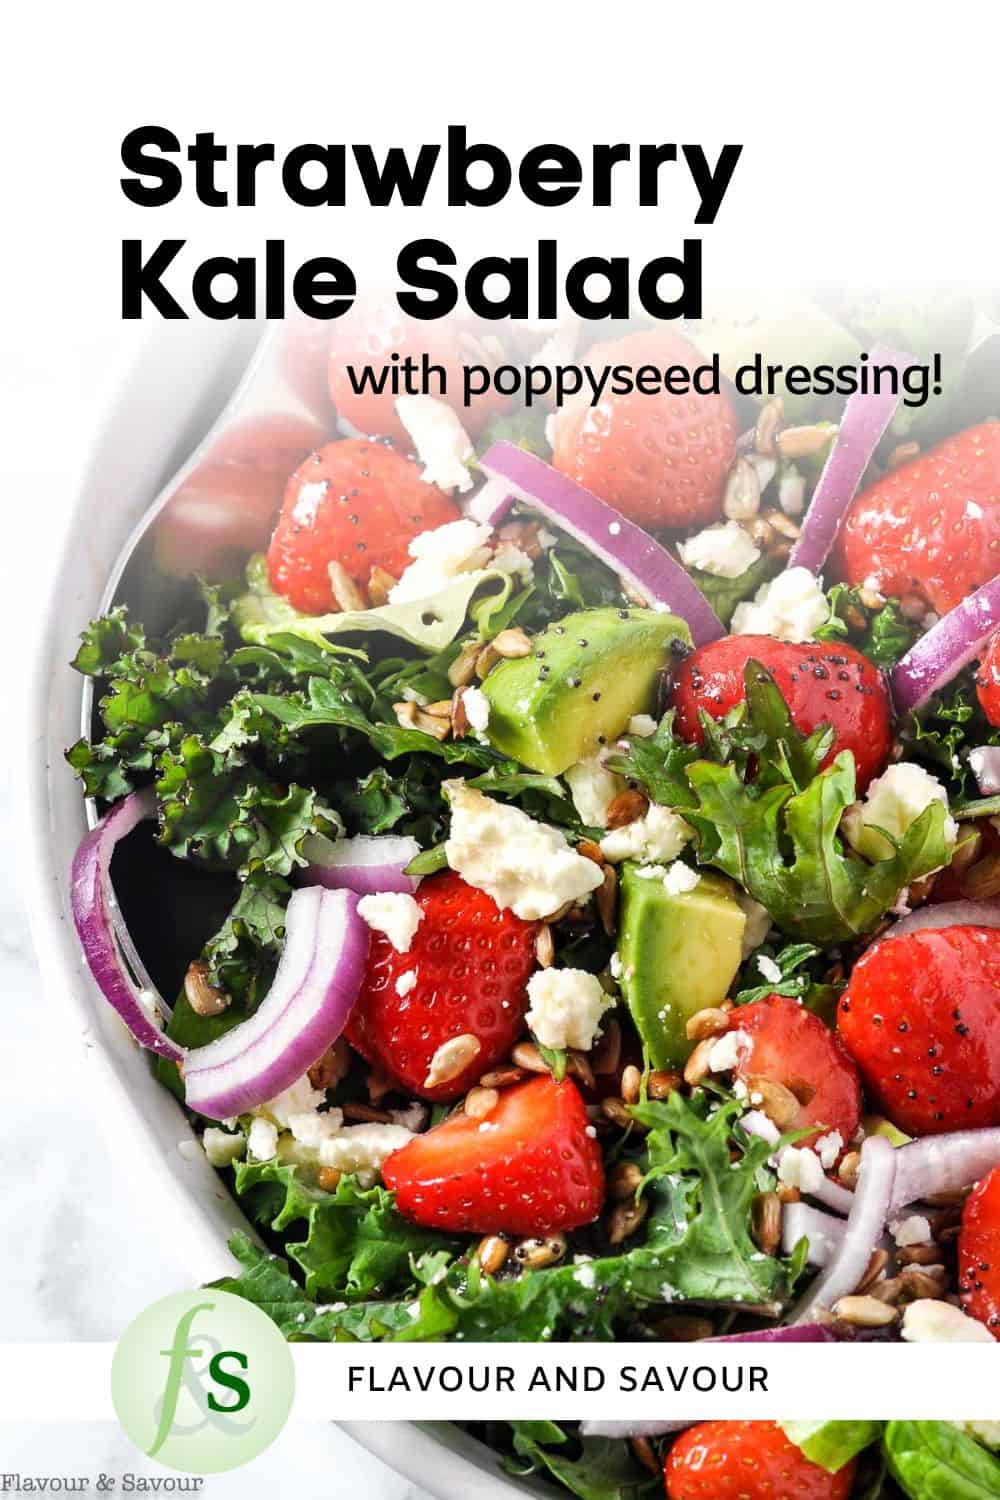 Image with text for Strawberry Kale Salad with Poppyseed Dressing.